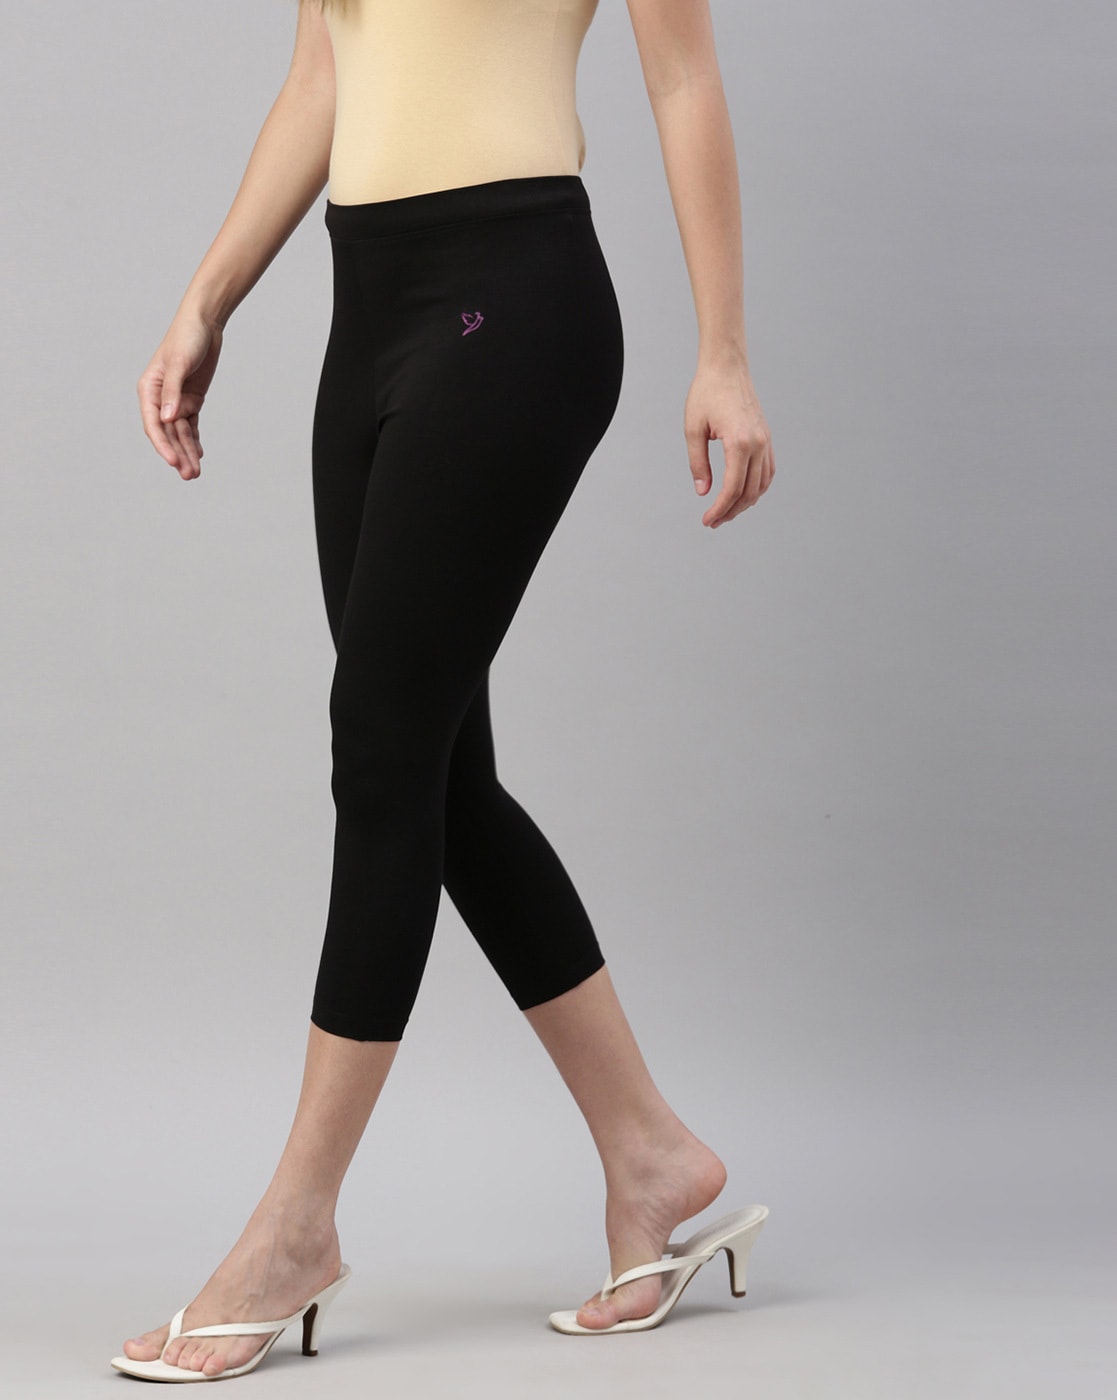 Twin Birds Online - Get fashionable with capri leggings from Twin